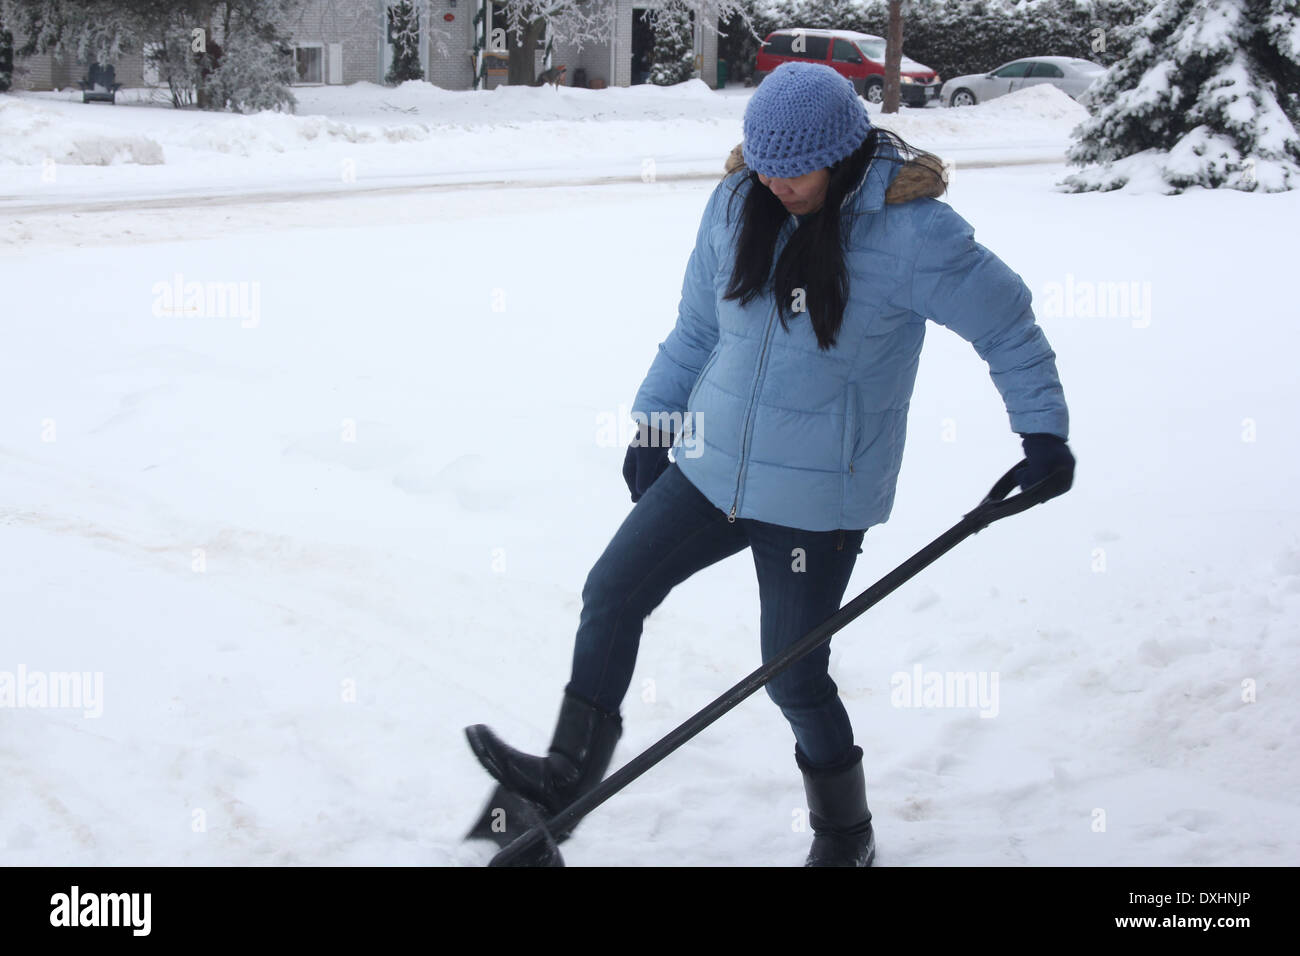 Lady shoveling snow off sidewalk after a snowfall. Stock Photo